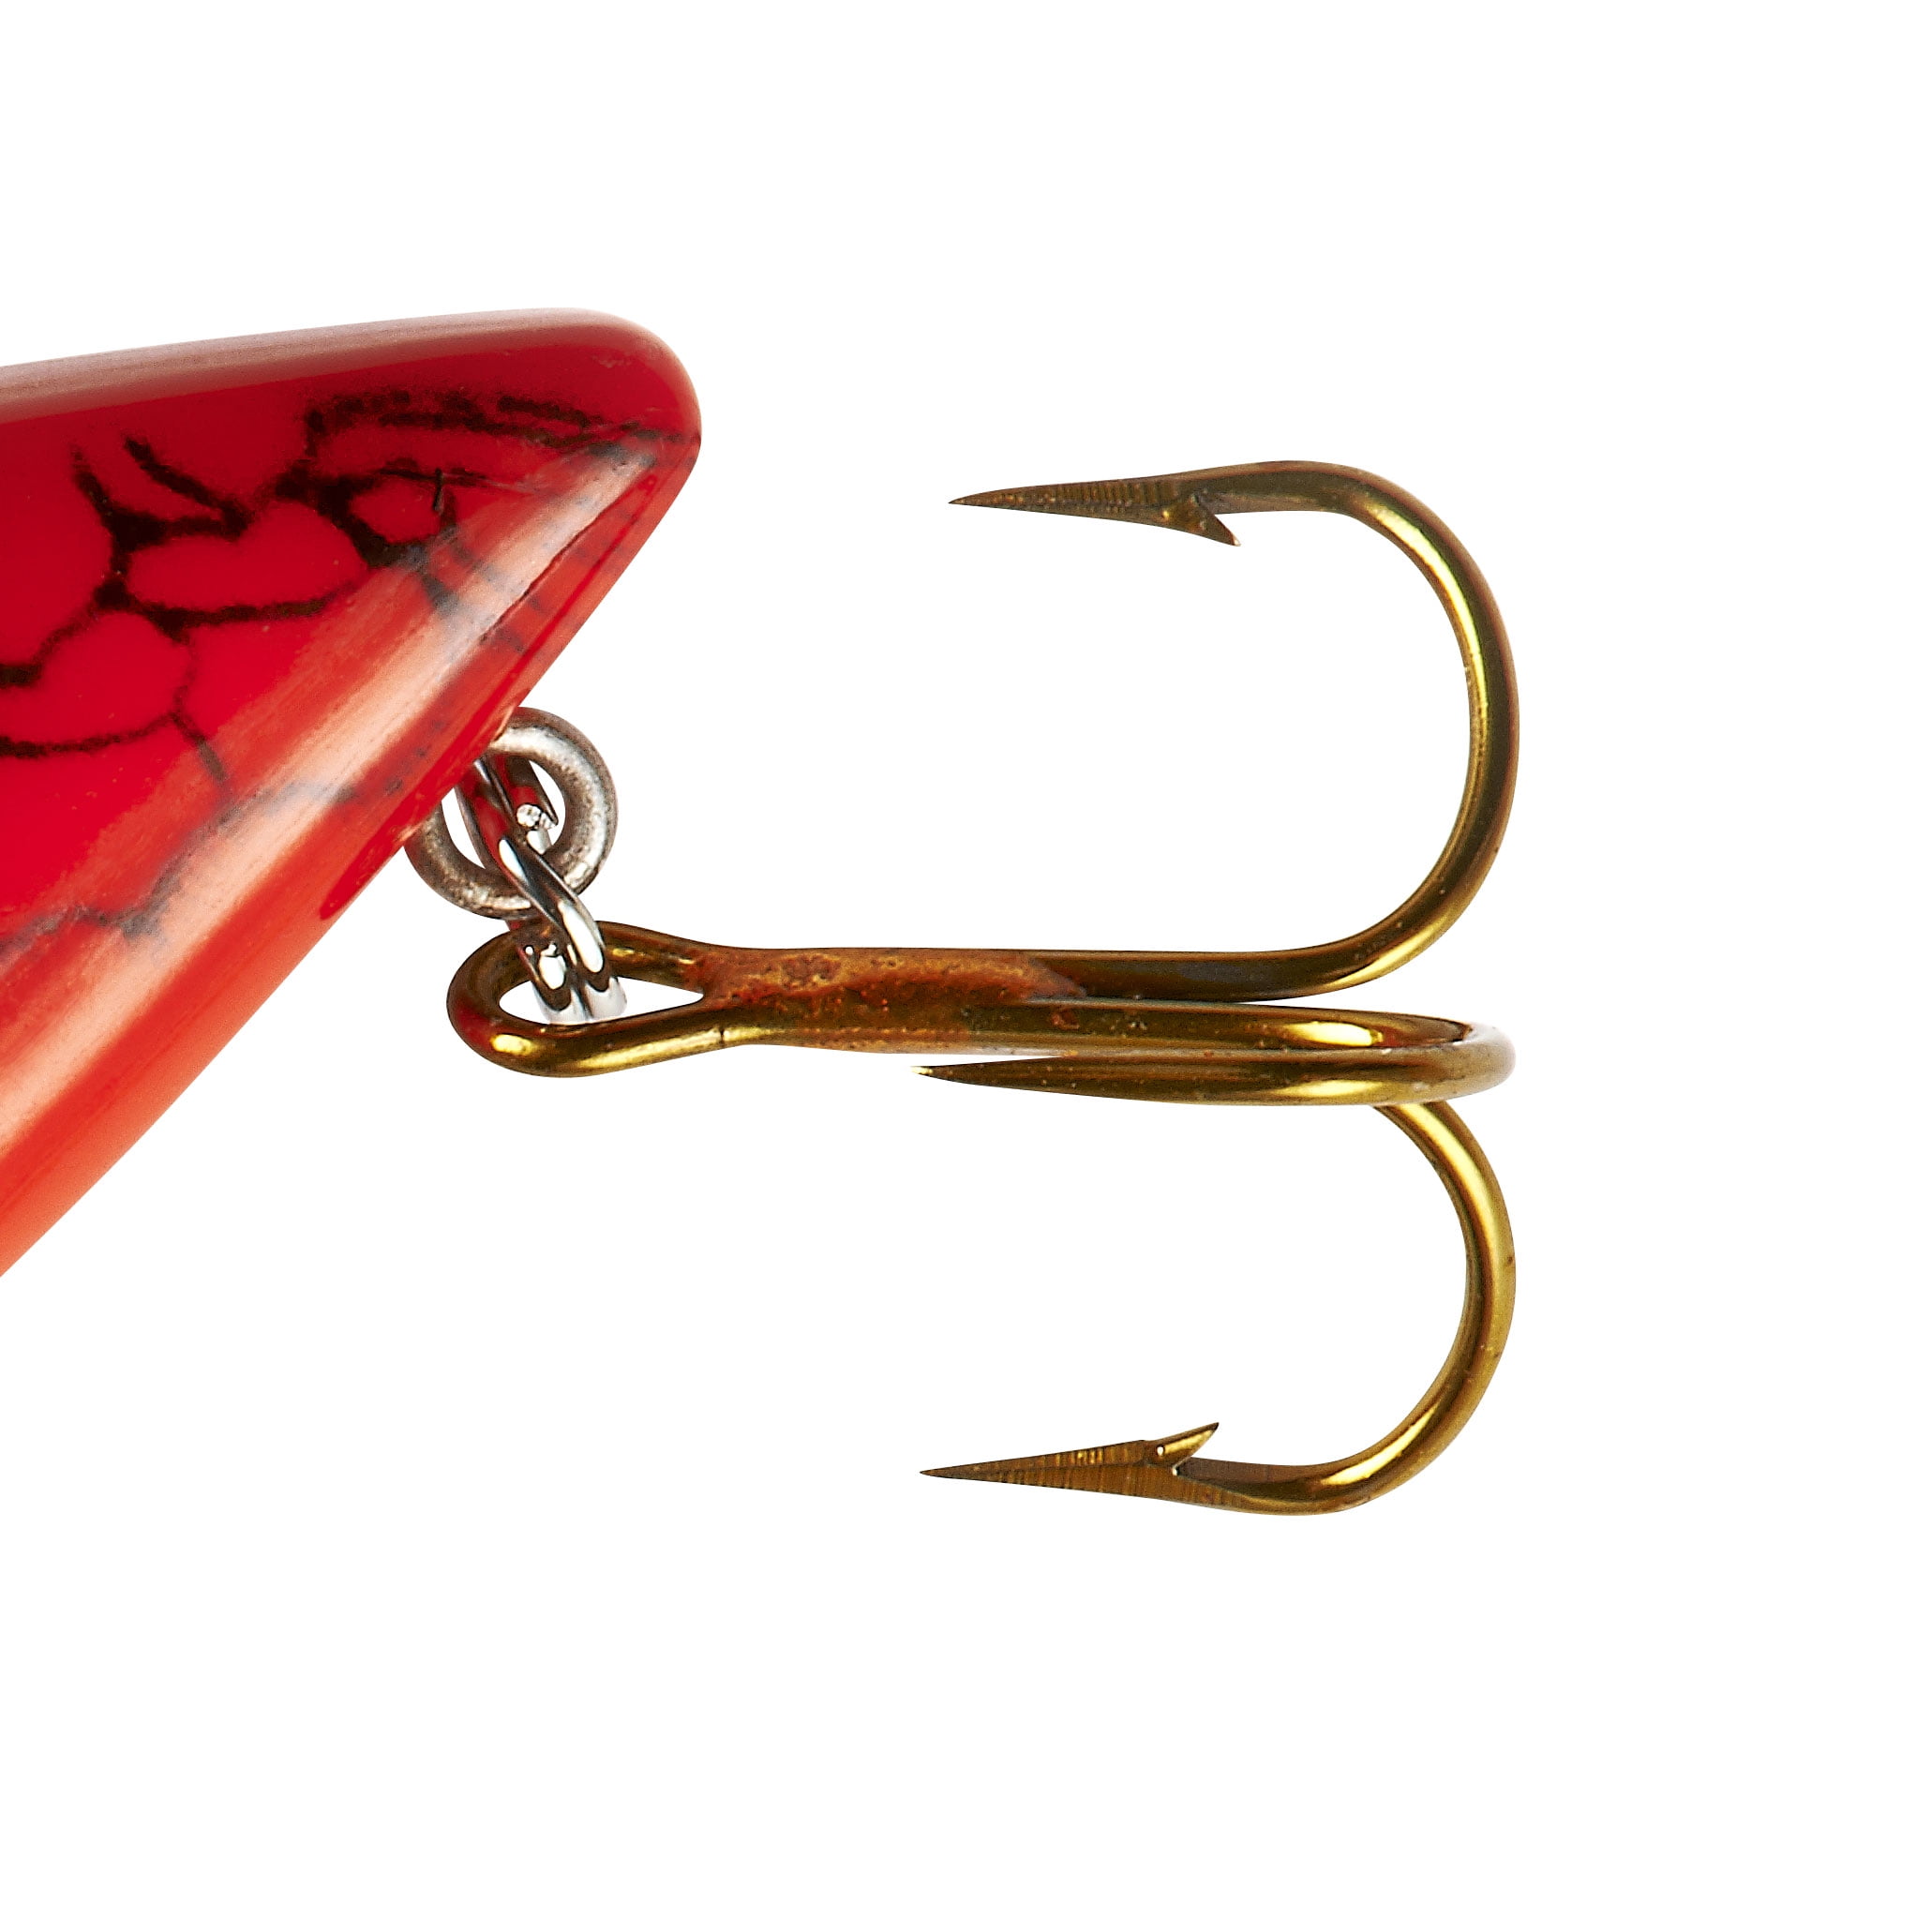 BRIAN'S BEES CRANKBAITS SQUAREBILL Fishing Lure • RED CRAW – Toad